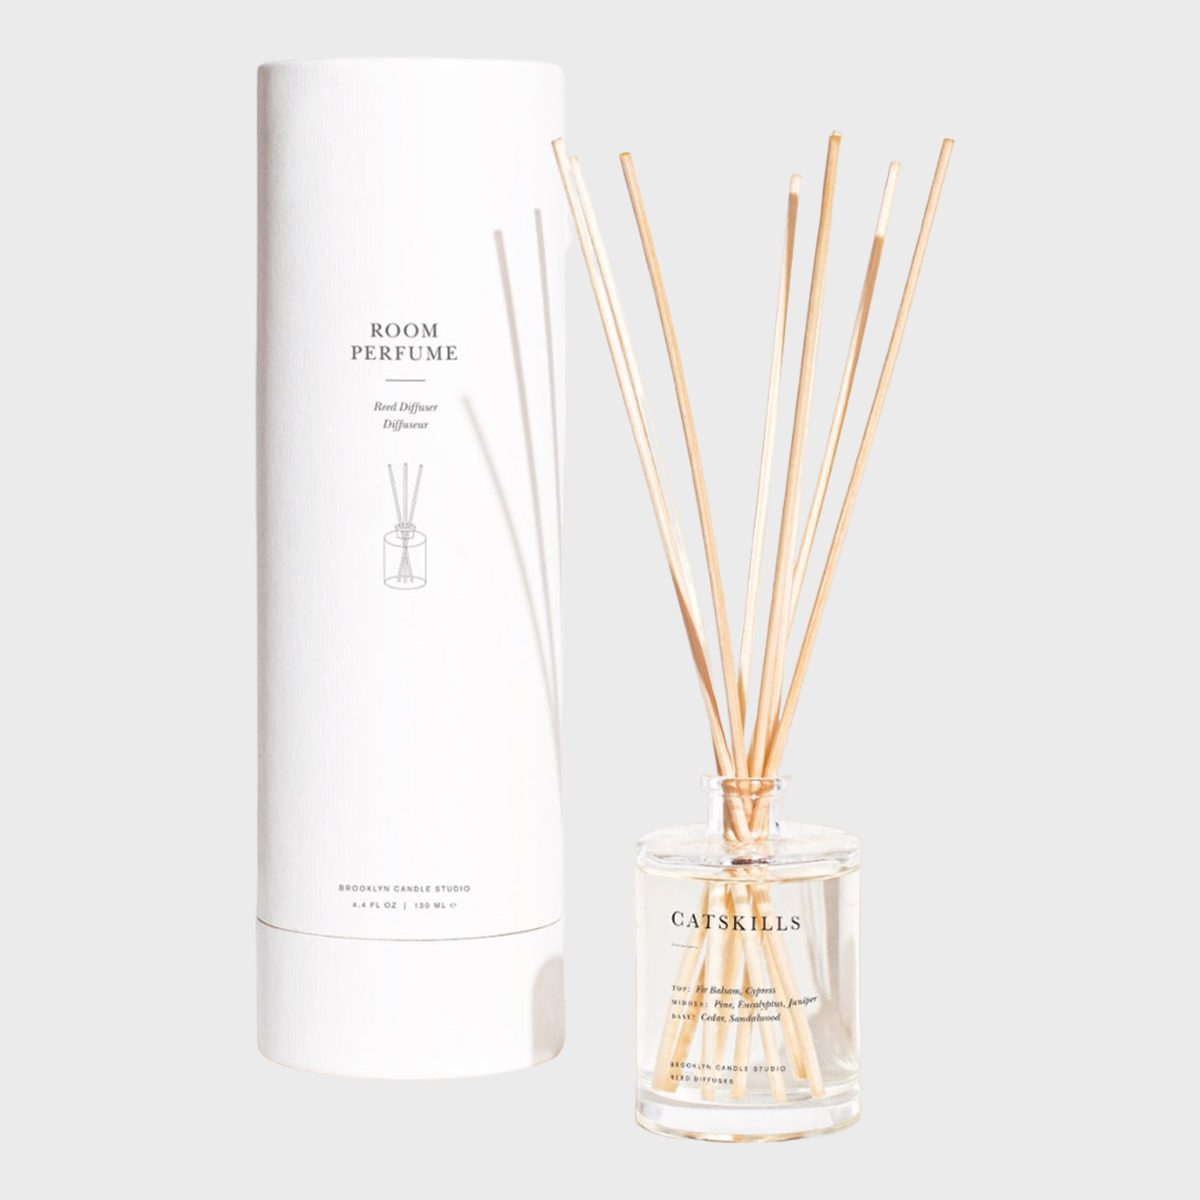 For The One Who Needs A Break Brooklyn Candle Studio Catskills Reed Diffuser